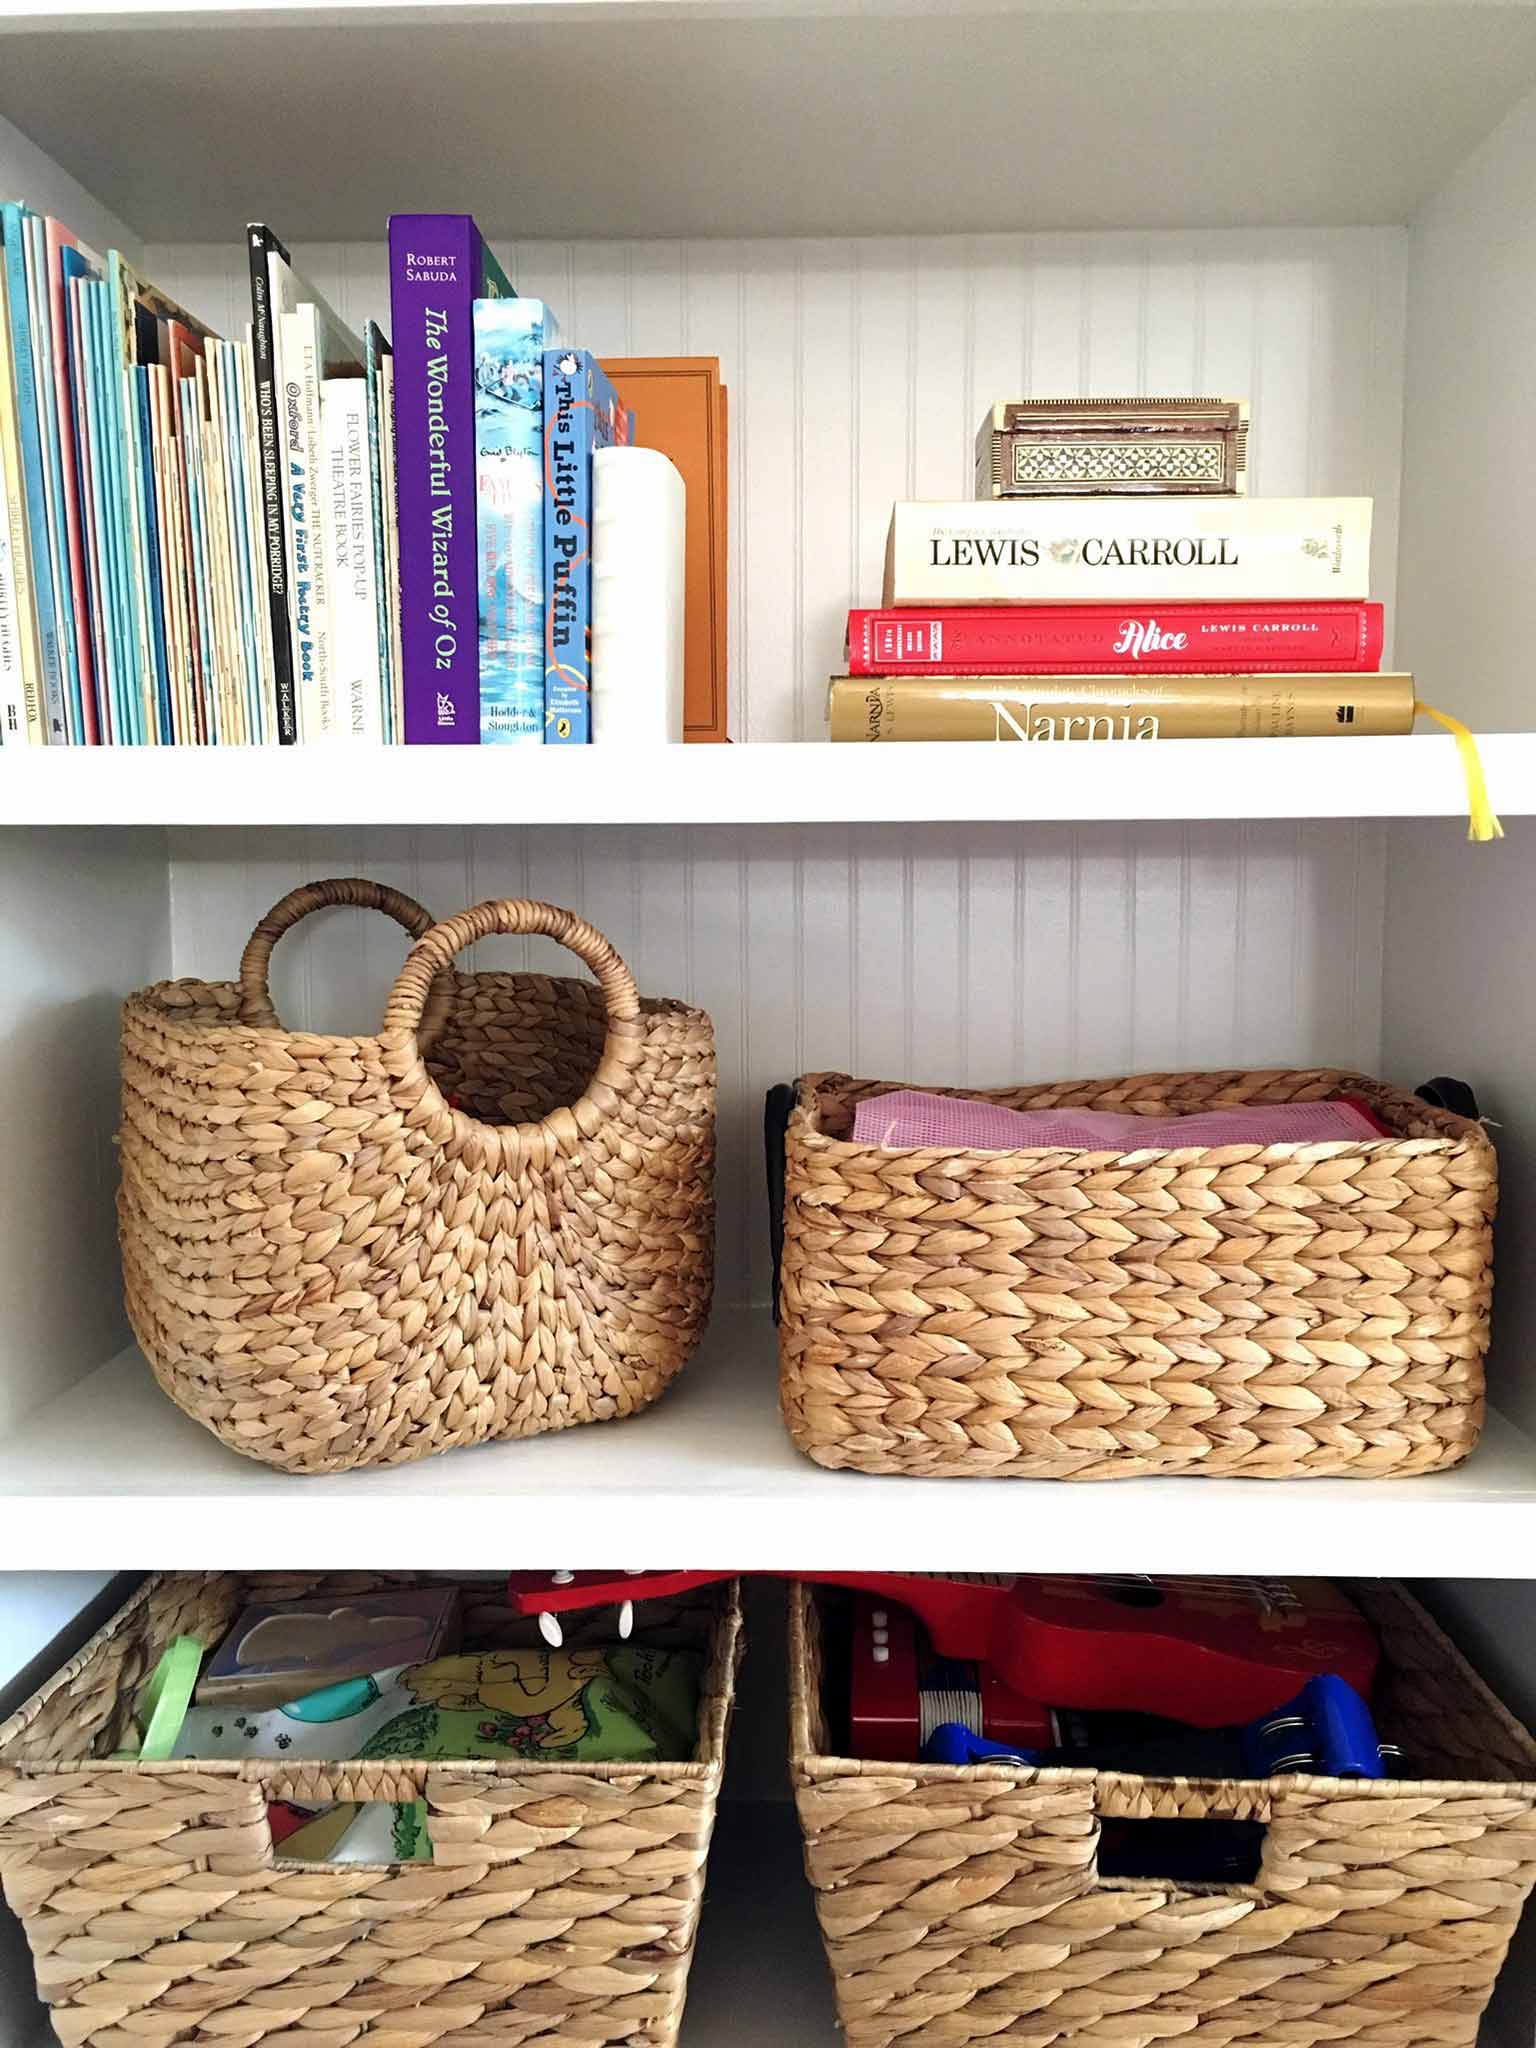 Built-in book shelf - How to Declutter, Organize and Style Kids' Books - That Homebird Life Blog